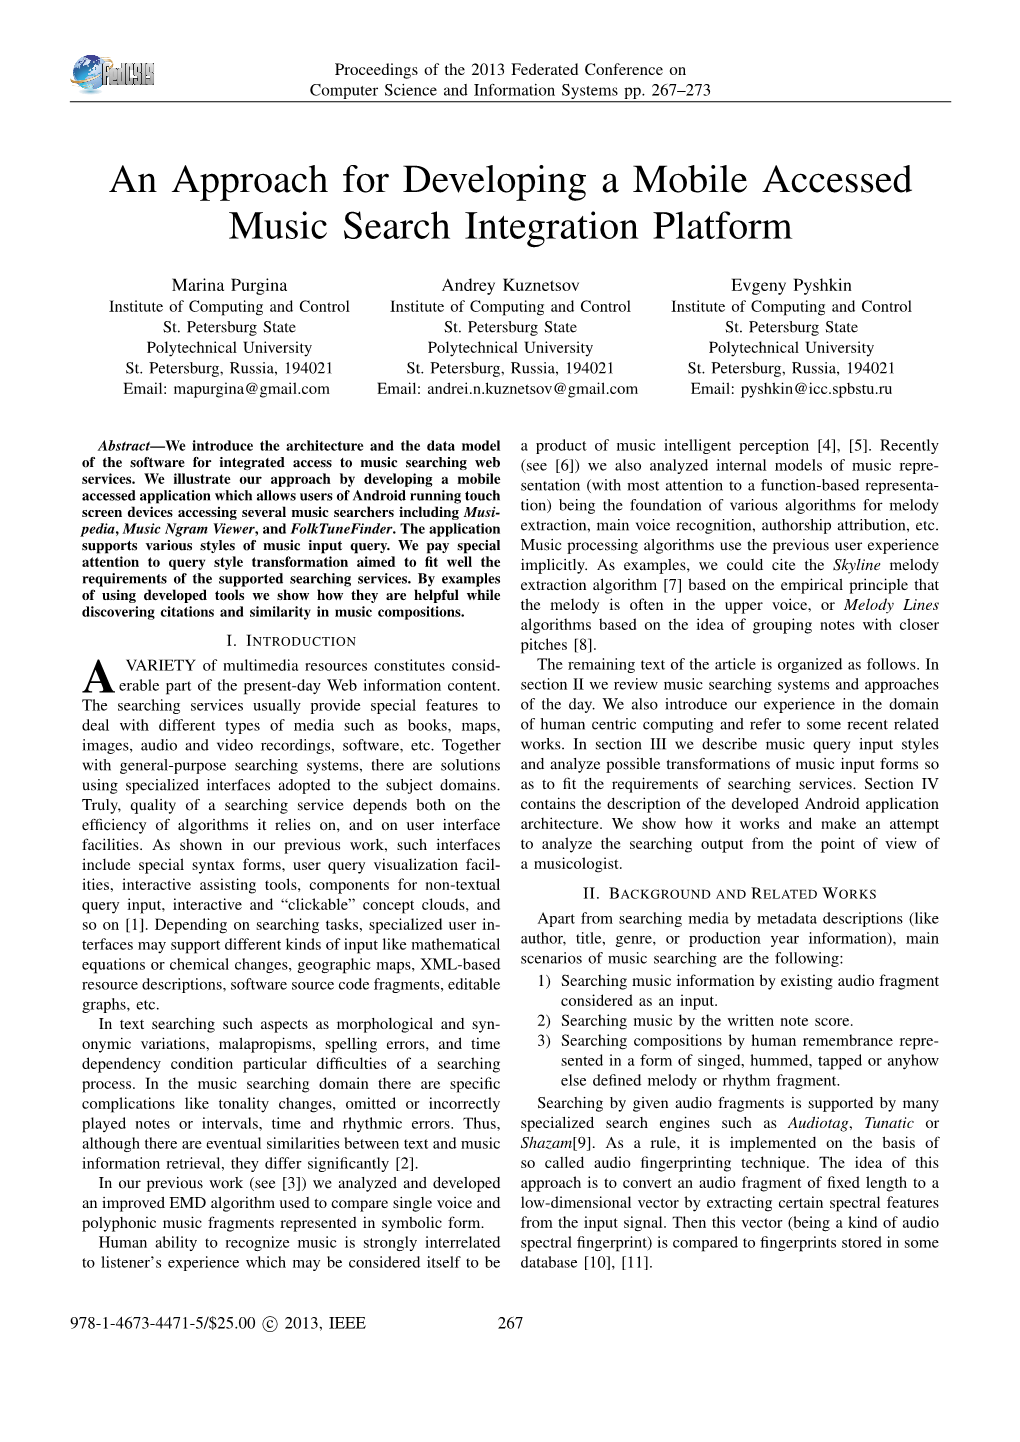 An Approach for Developing a Mobile Accessed Music Search Integration Platform